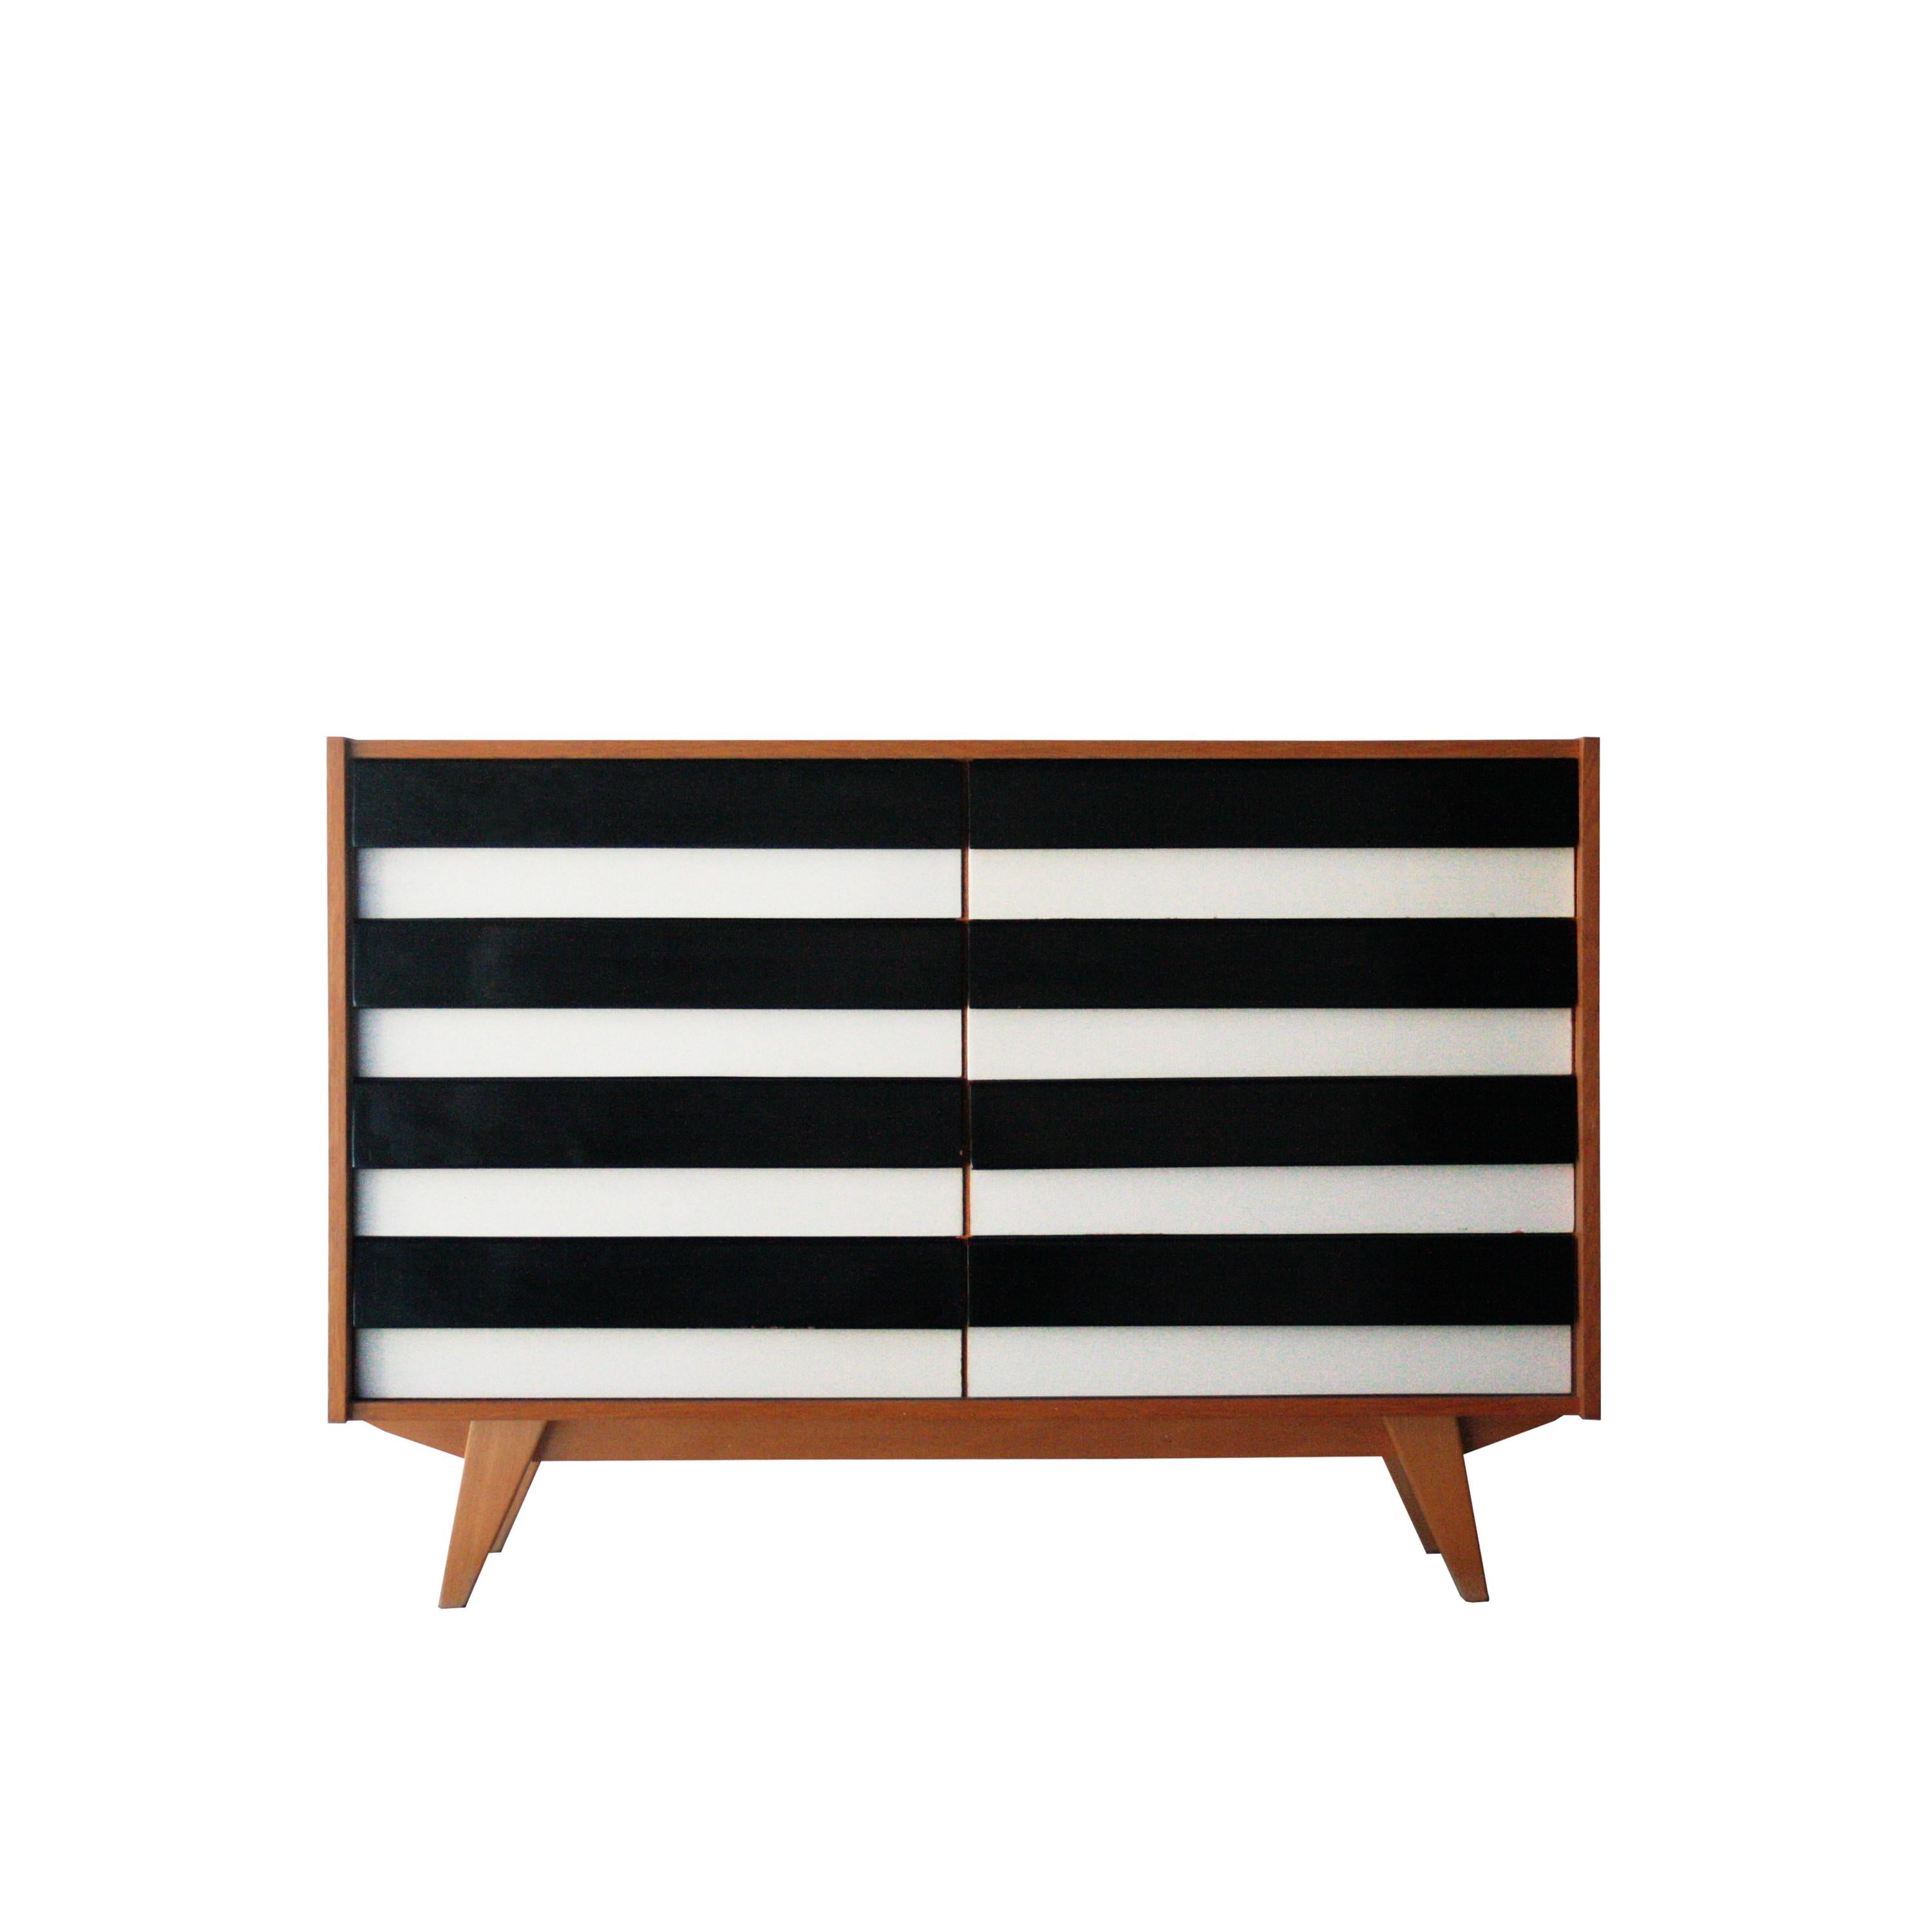 Dresser made of oak wood with eight drawers with black and white lacquered front.